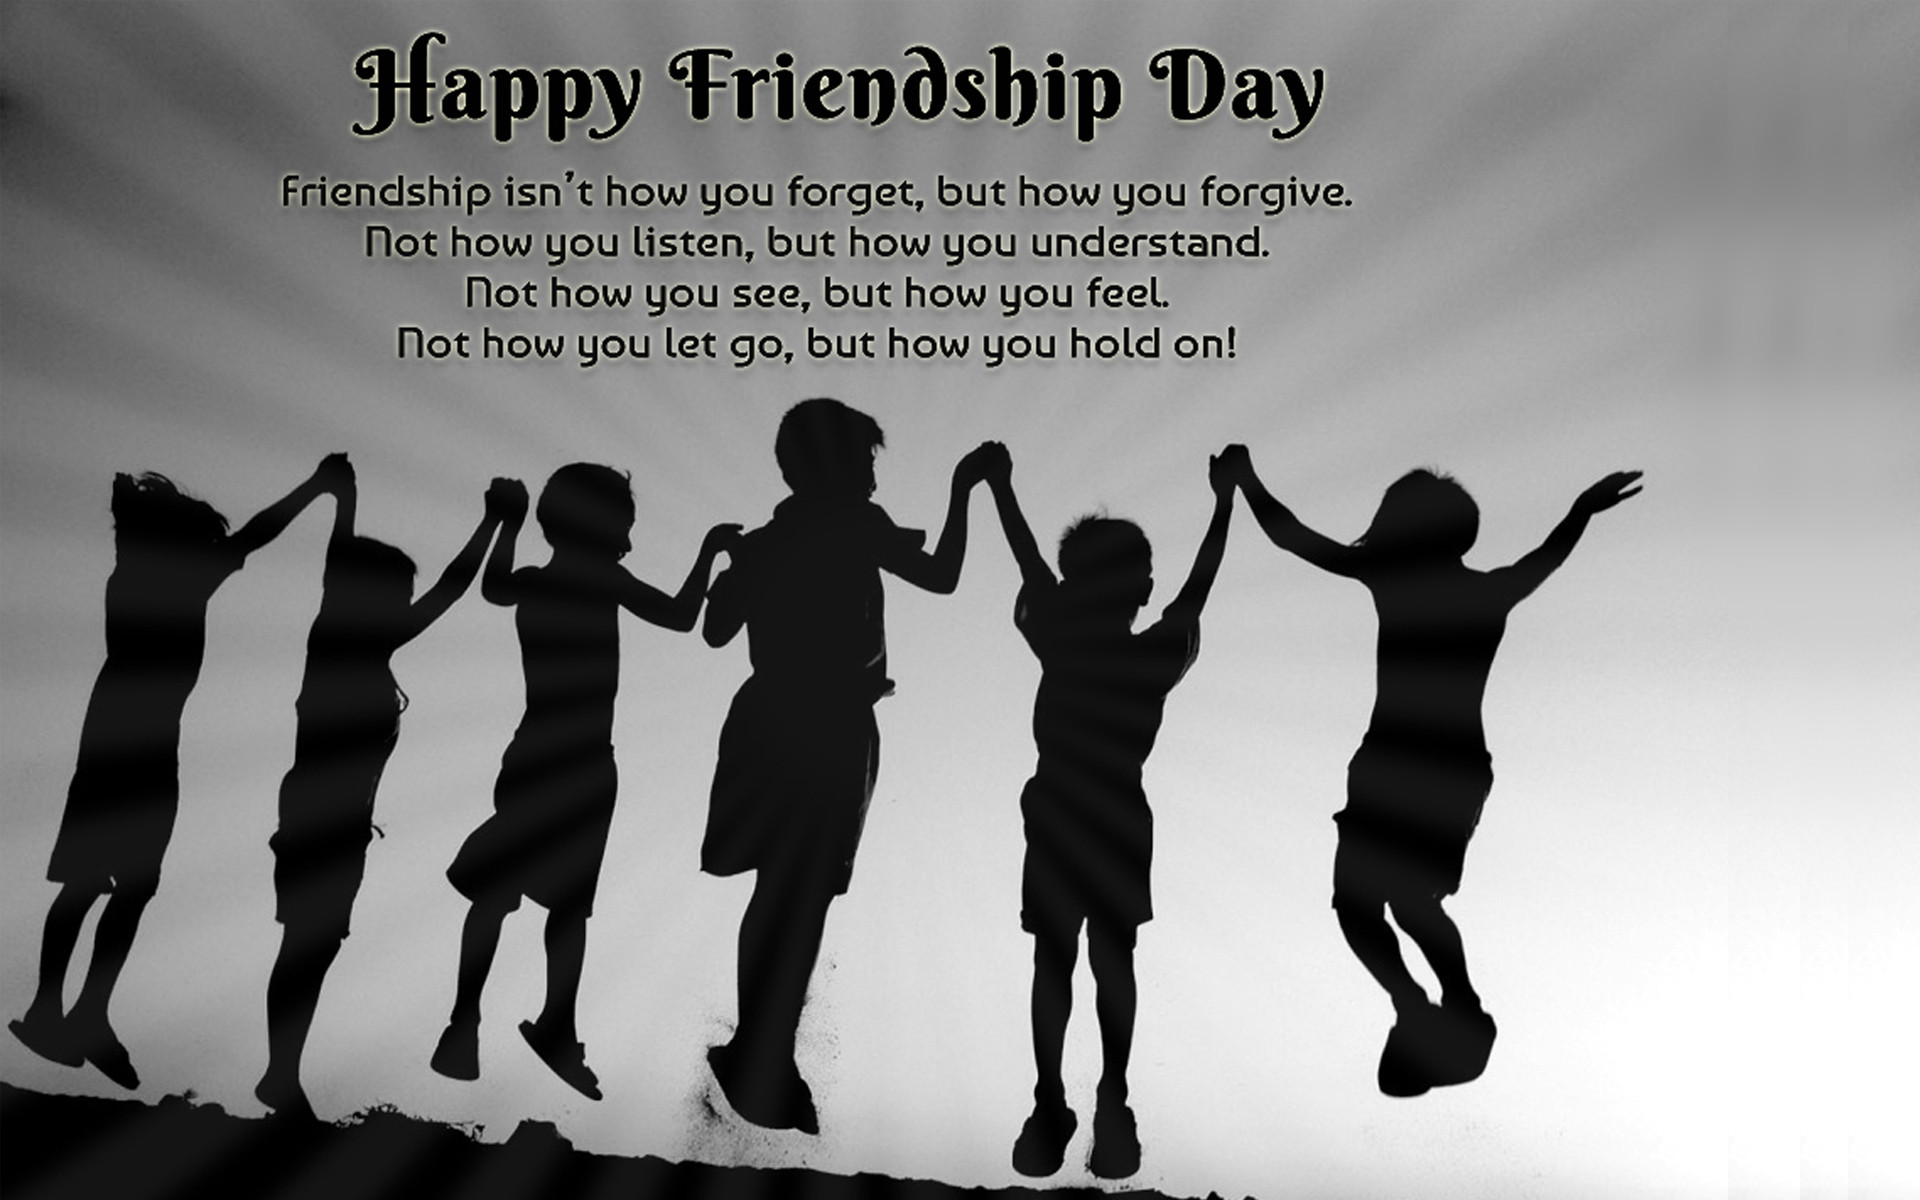 Happy Friendship Day Hd Images, Wallpapers - Happy Friendship Day Images Hd - HD Wallpaper 